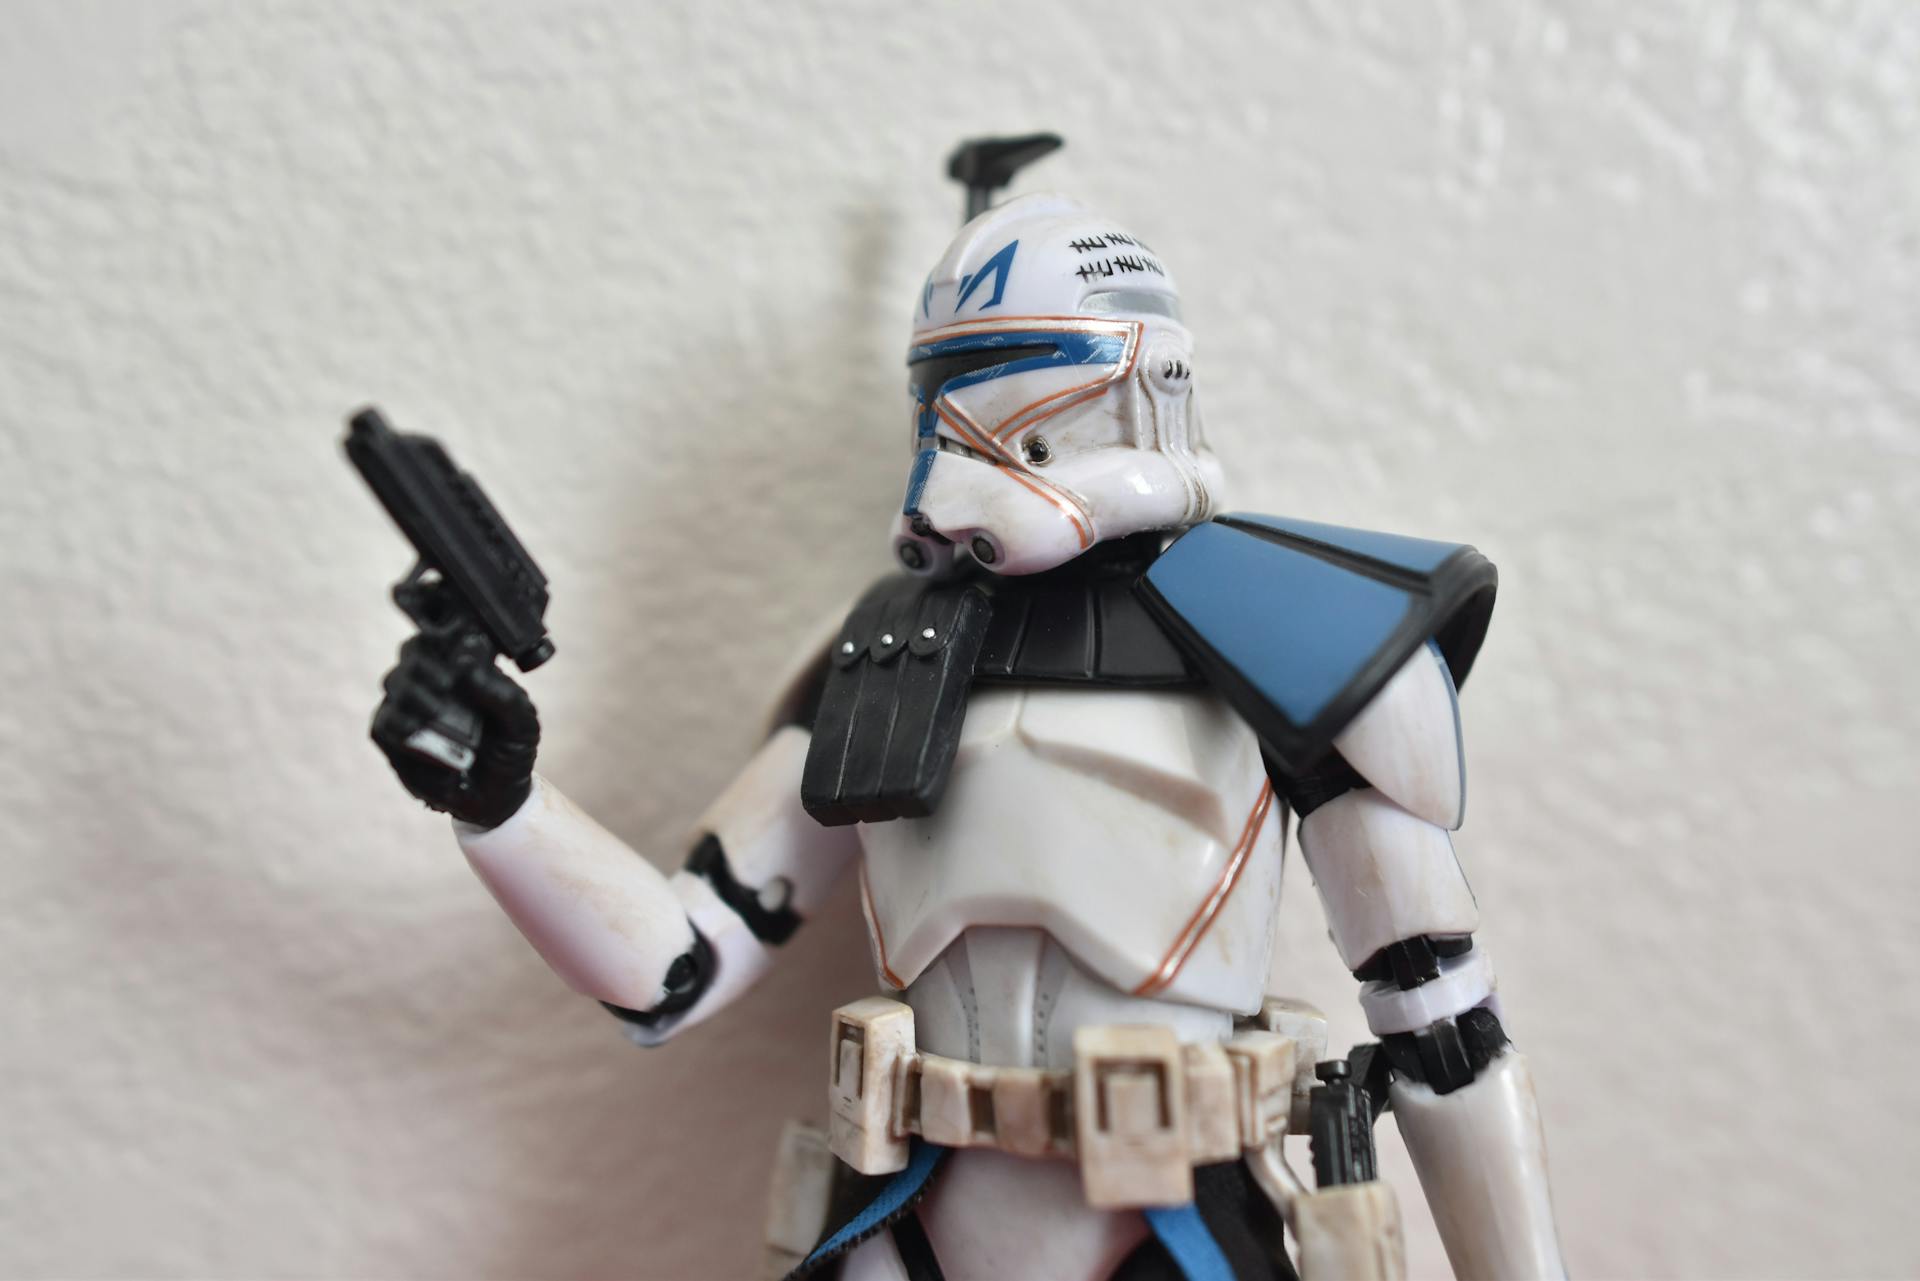 Close up of a storm trooper figurine with blue shoulder detail